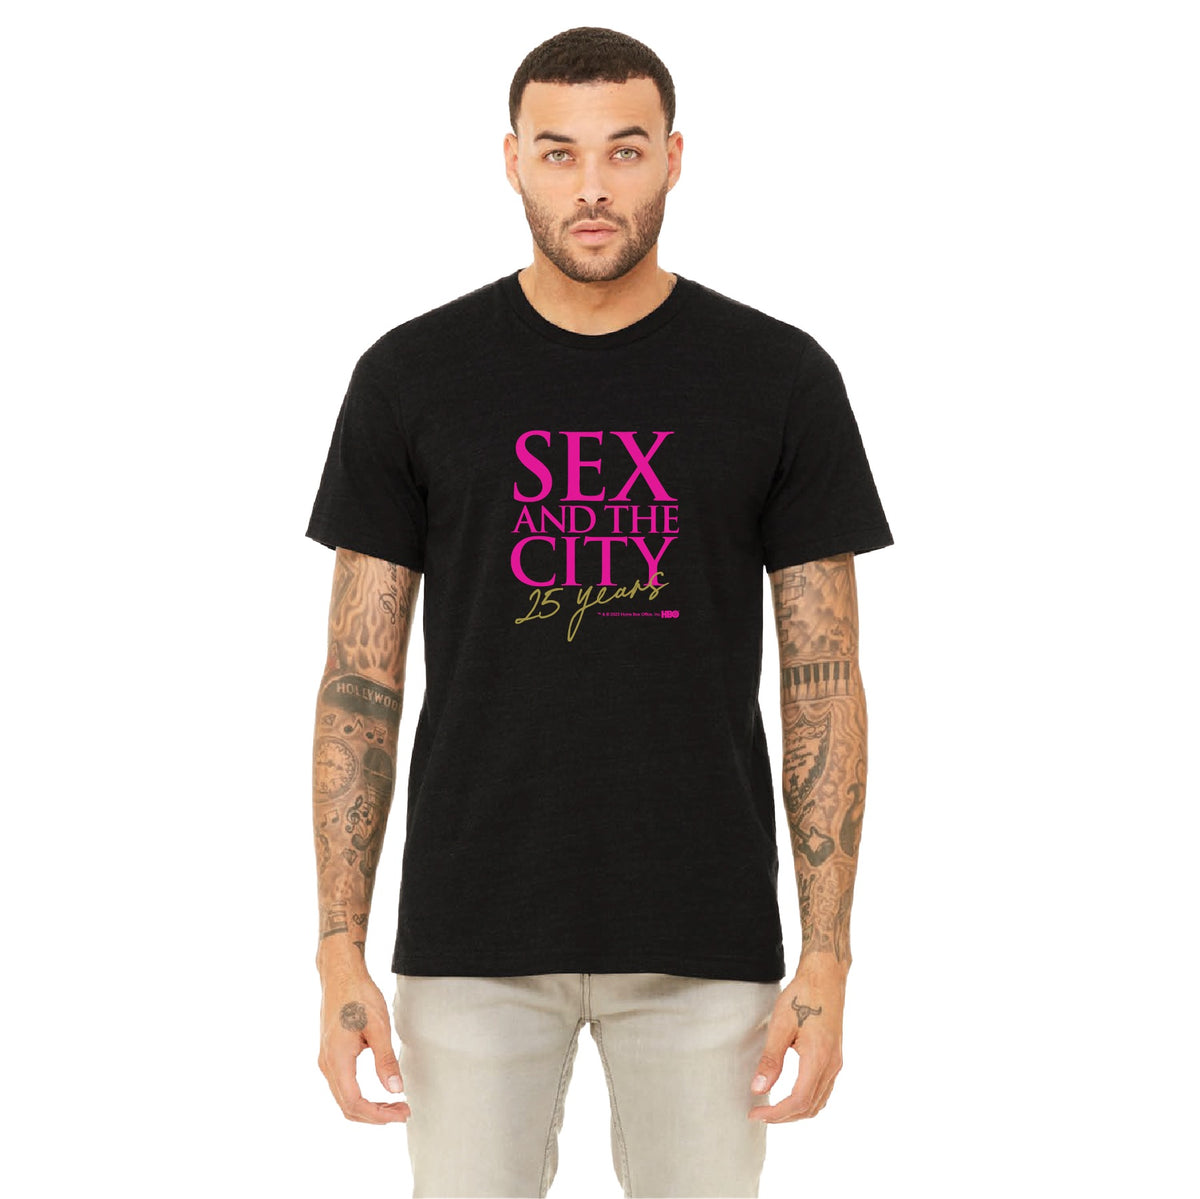 Sex and the City 25th Anniversary Adult T-Shirt